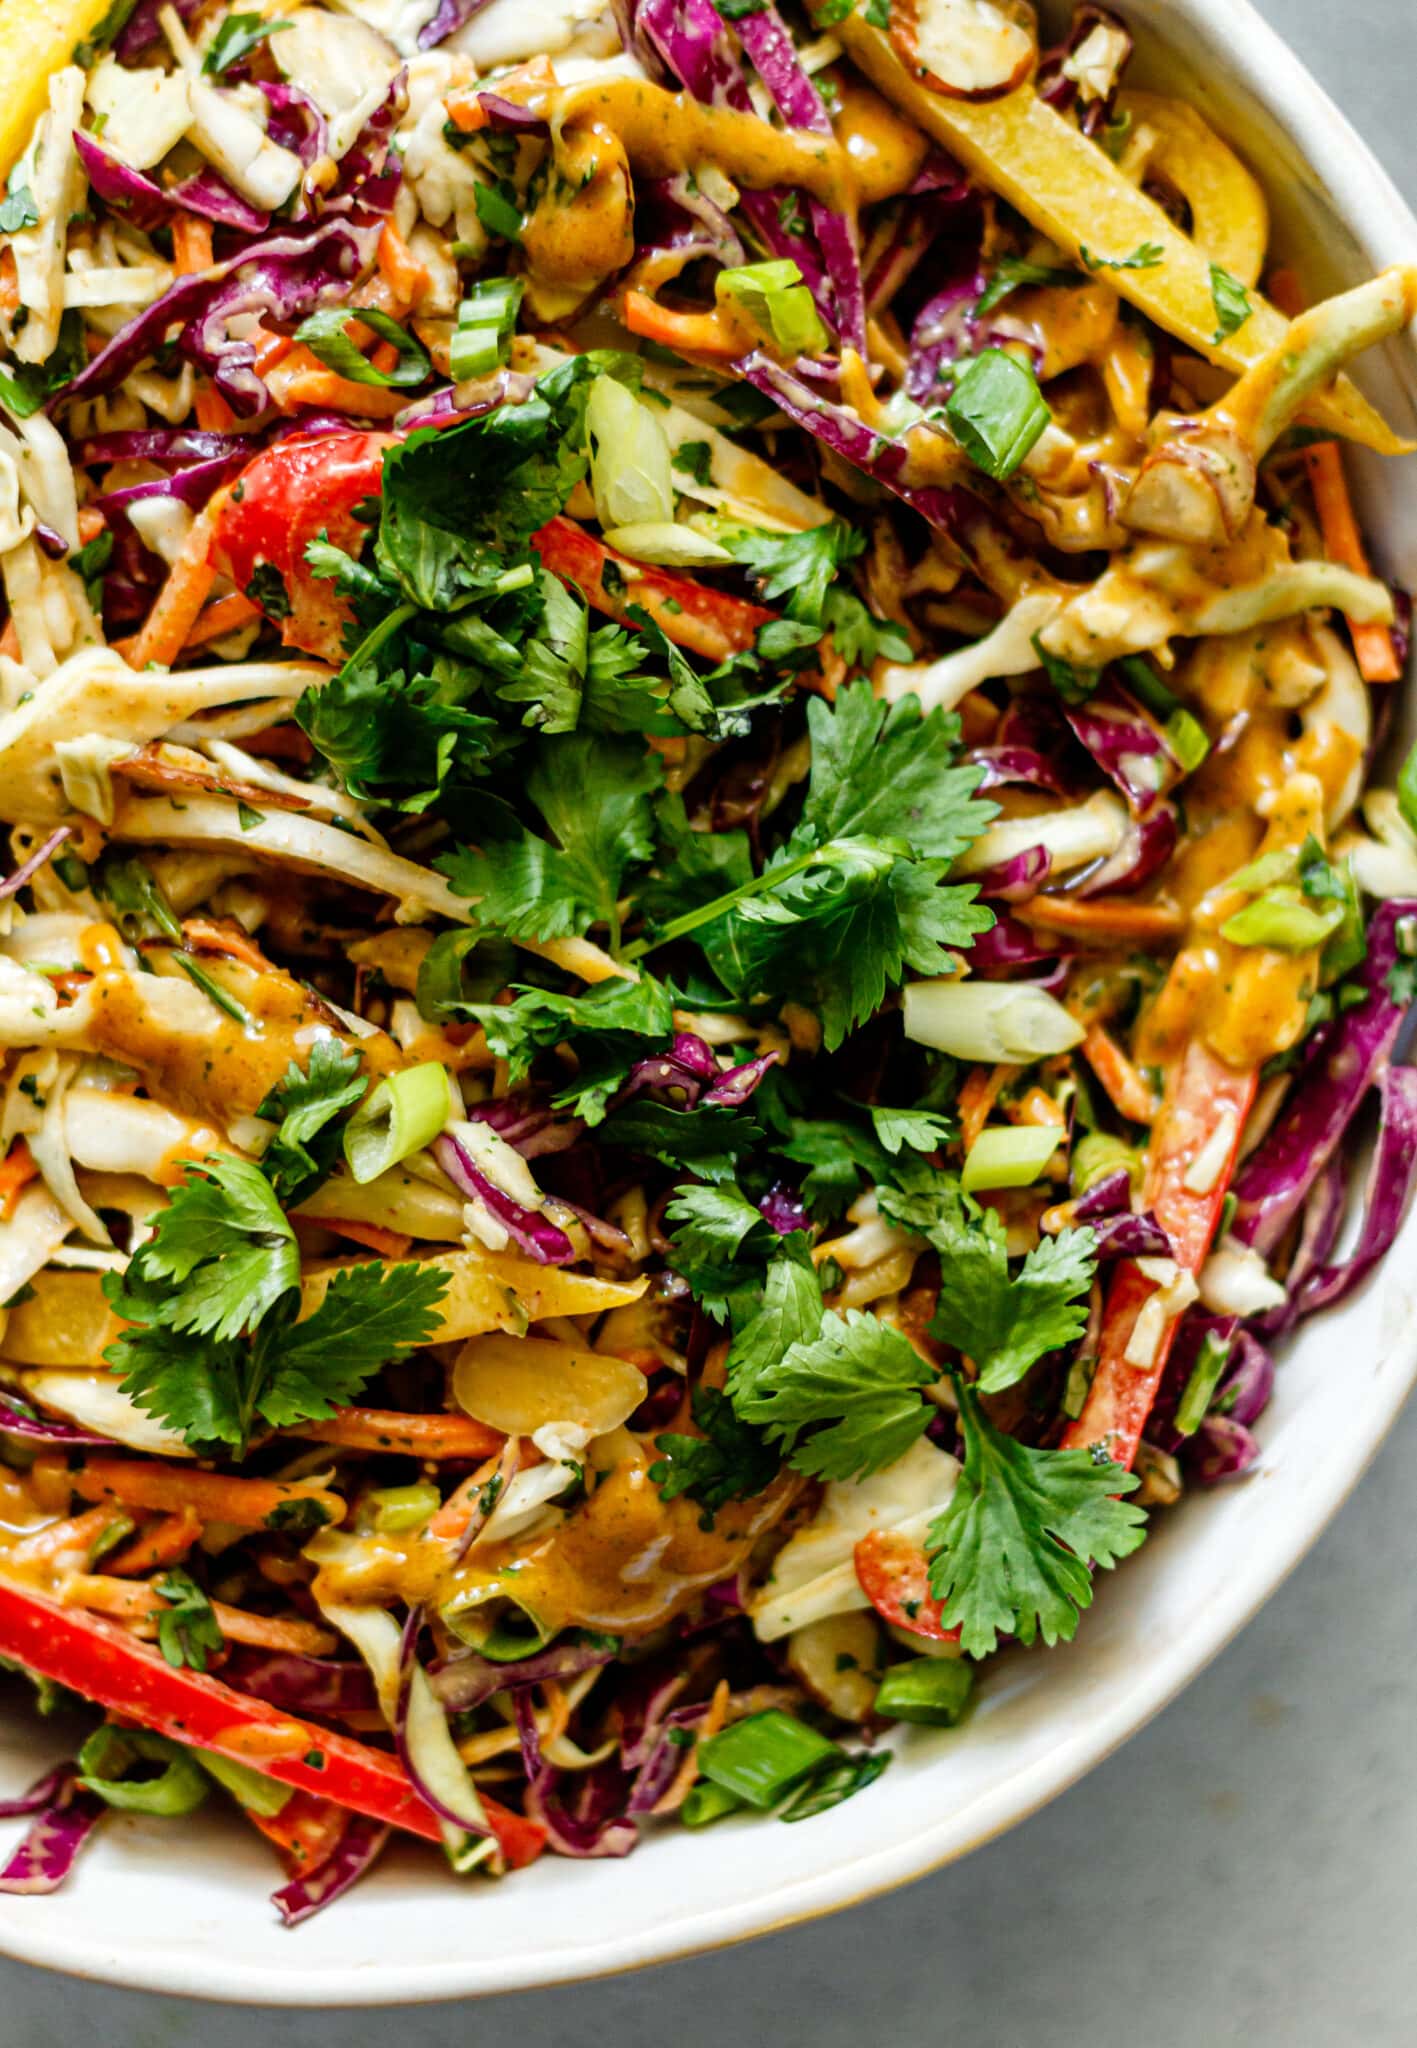 Thai Crunch Salad with Creamy Peanut Dressing - All the Healthy Things